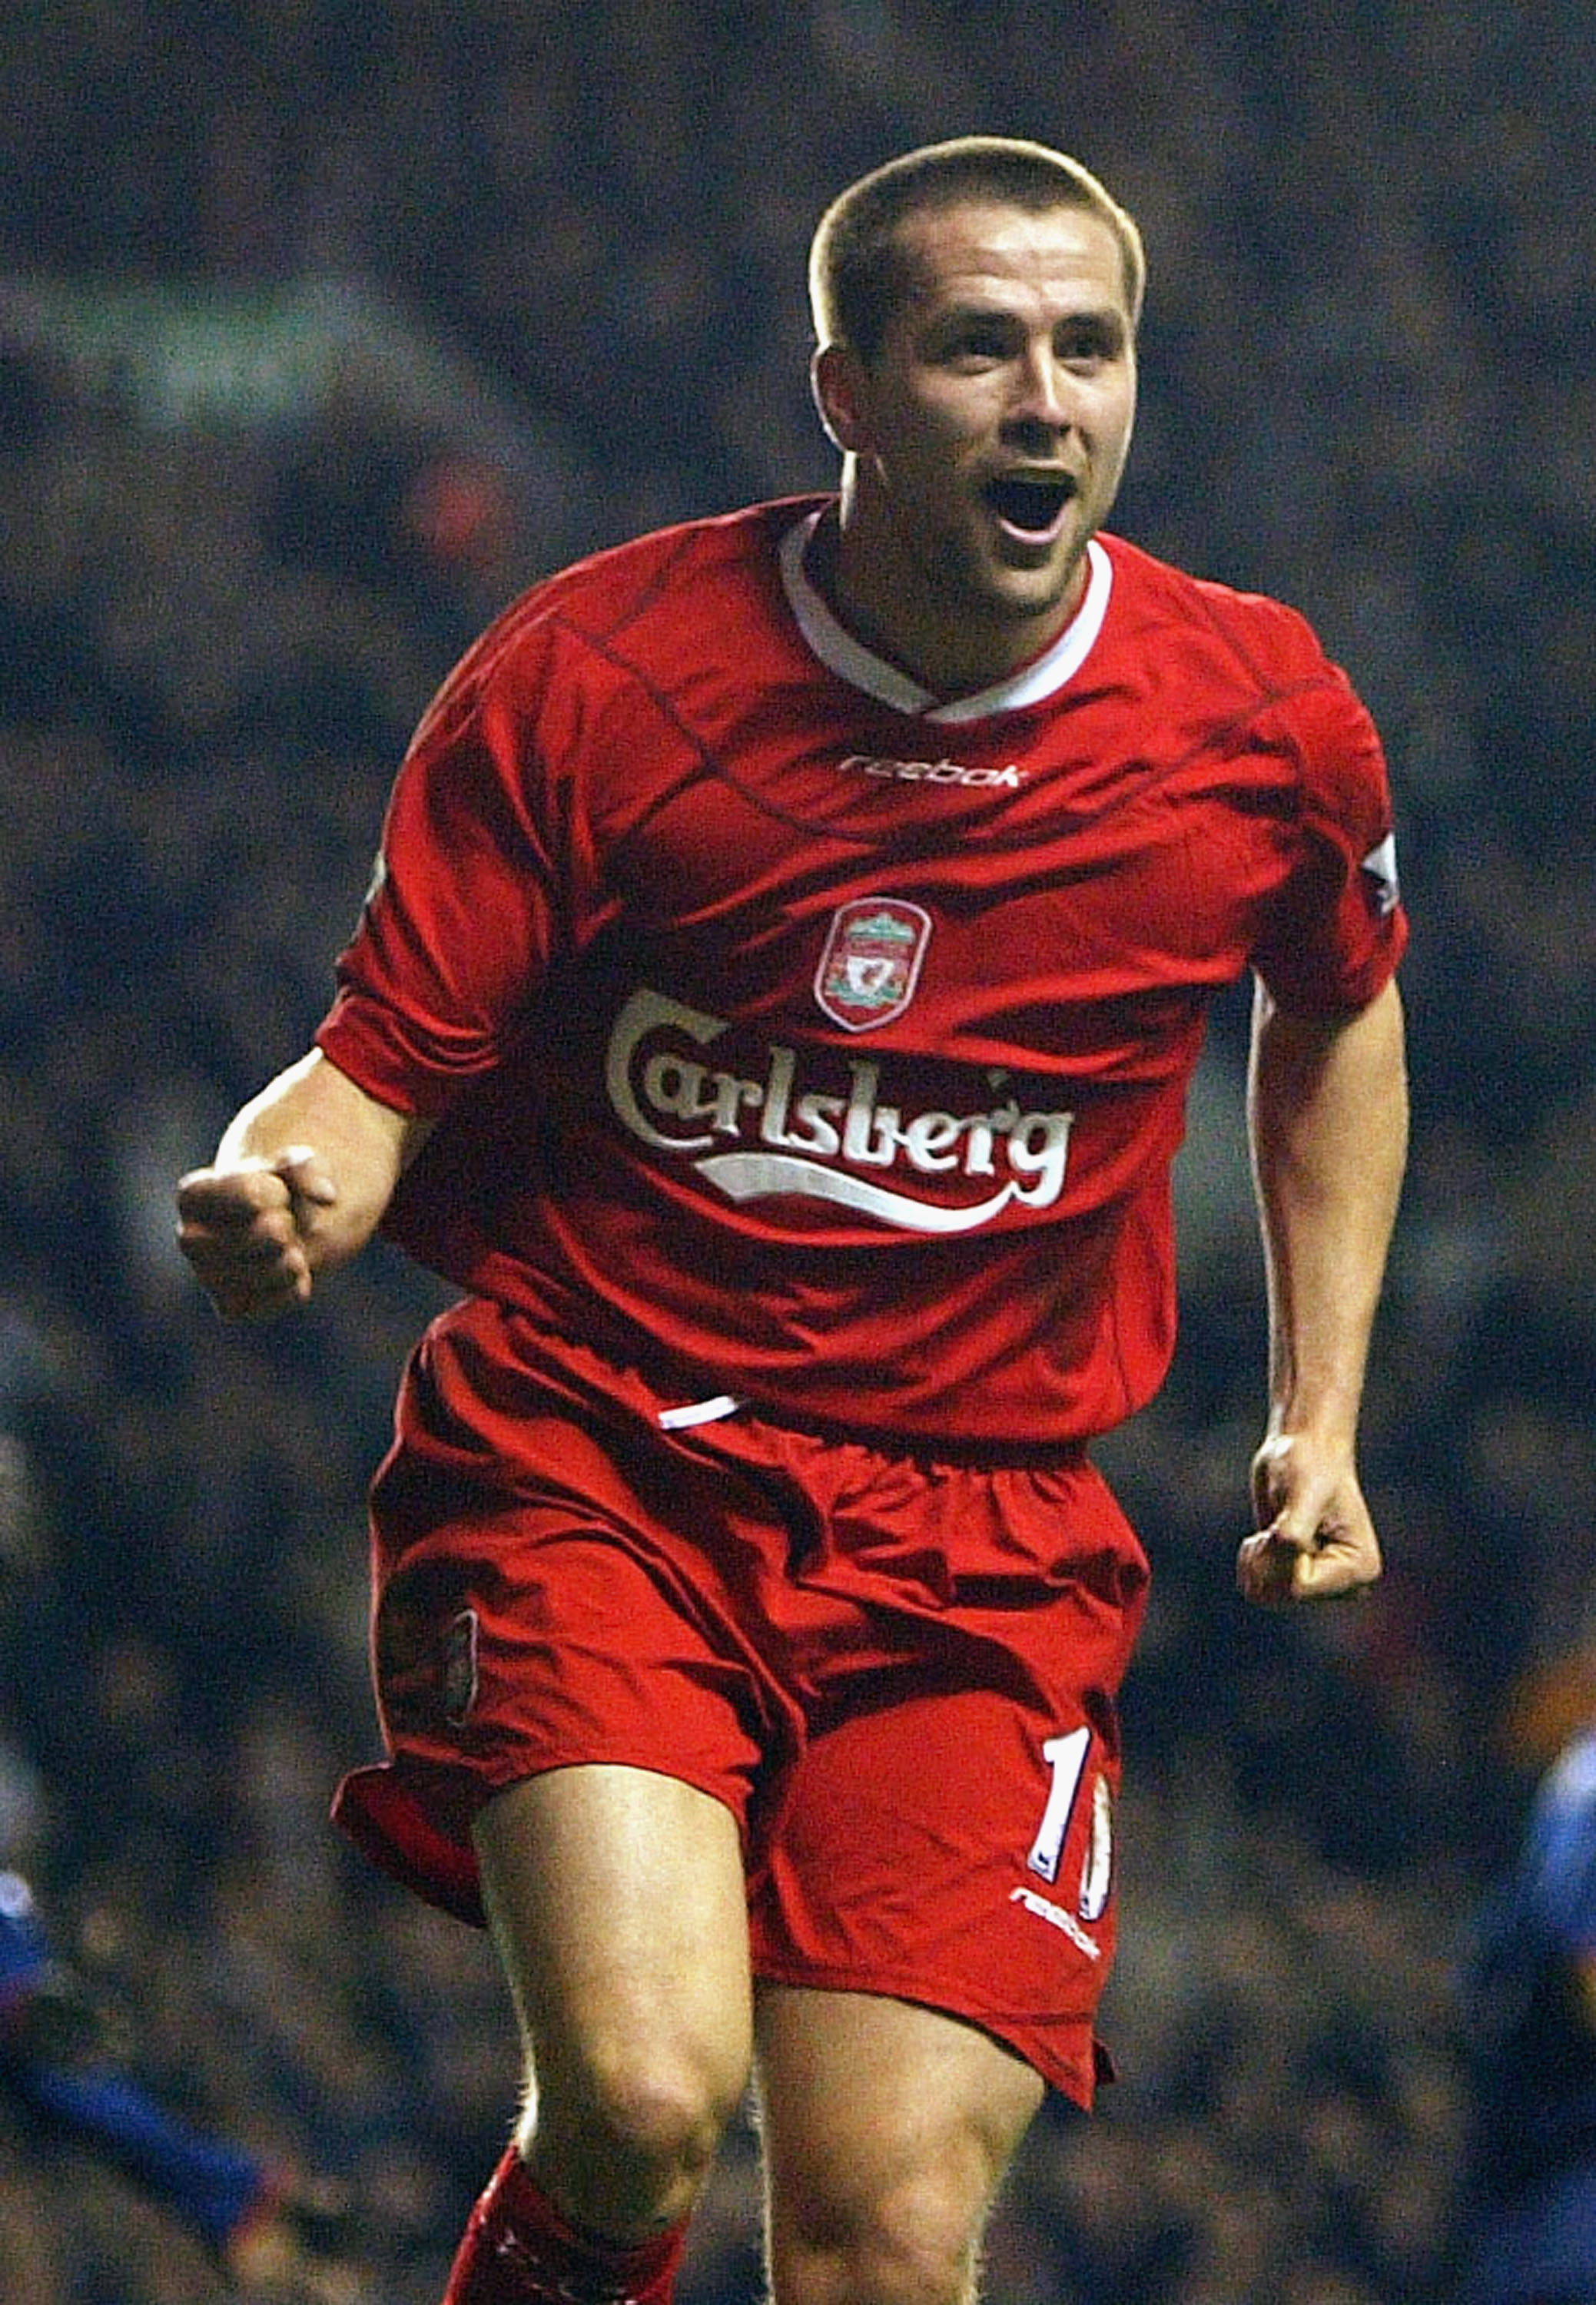 LIVERPOOL, ENGLAND - MARCH 17:  Michael Owen of Liverpool celebrates scoring his second goal during the FA Barclaycard Premiership match between Liverpool and Portsmouth at Anfield on March 17, 2004 in Liverpool, England.  (Photo by Bryn Lennon/Getty Imag